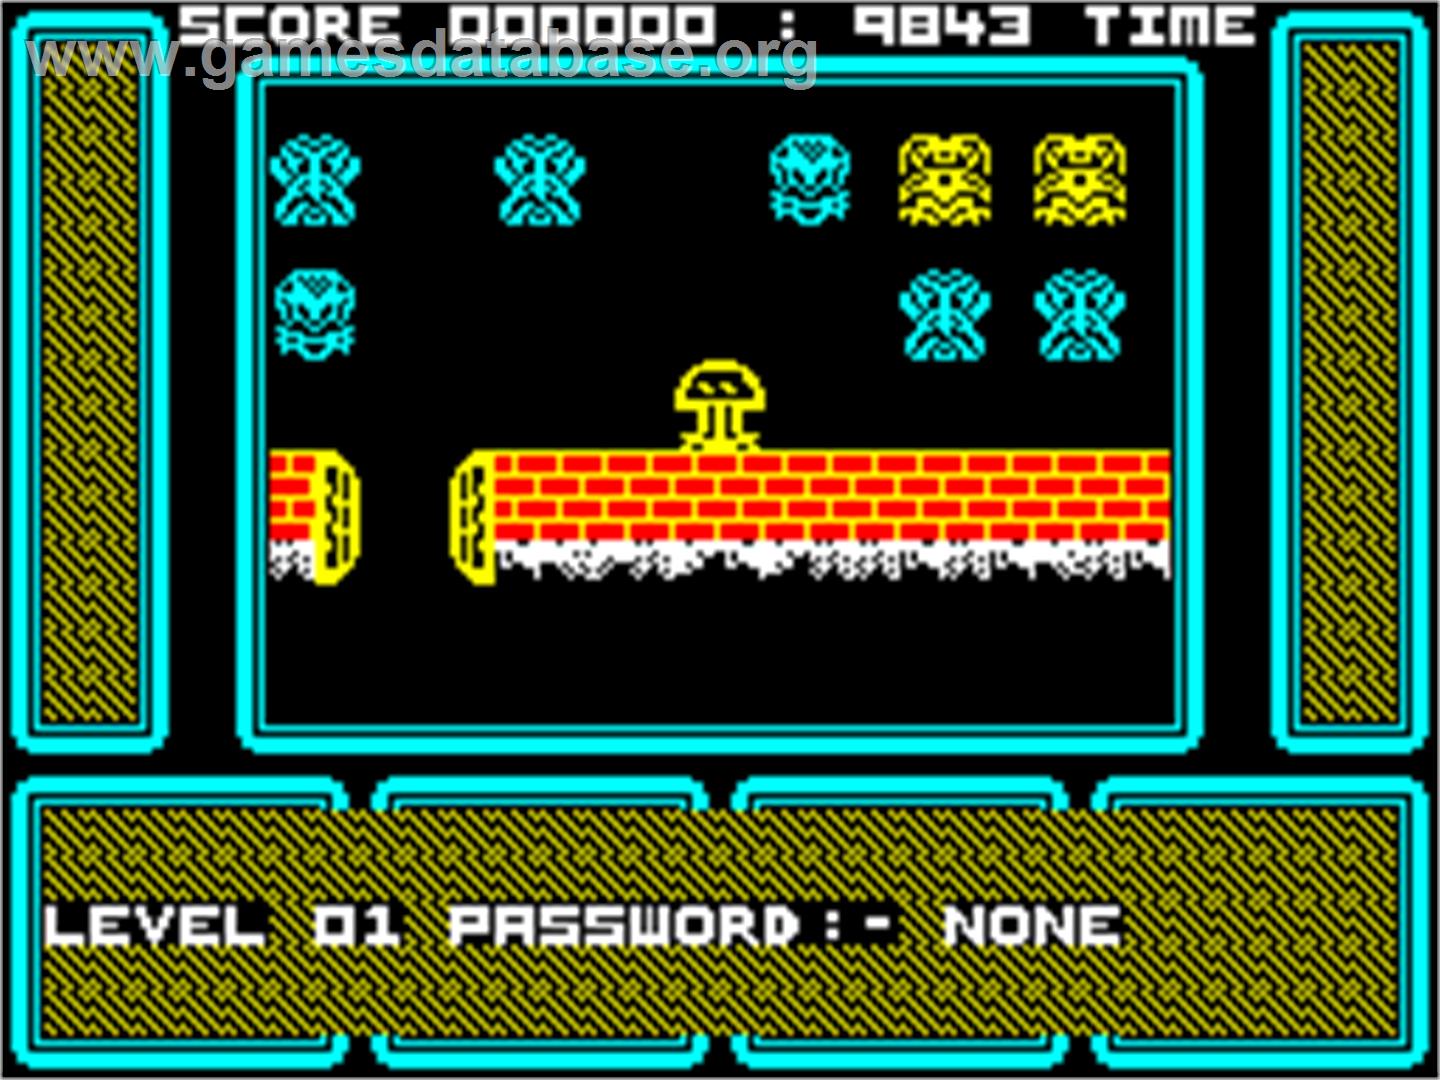 One Man and His Droid - Sinclair ZX Spectrum - Artwork - In Game